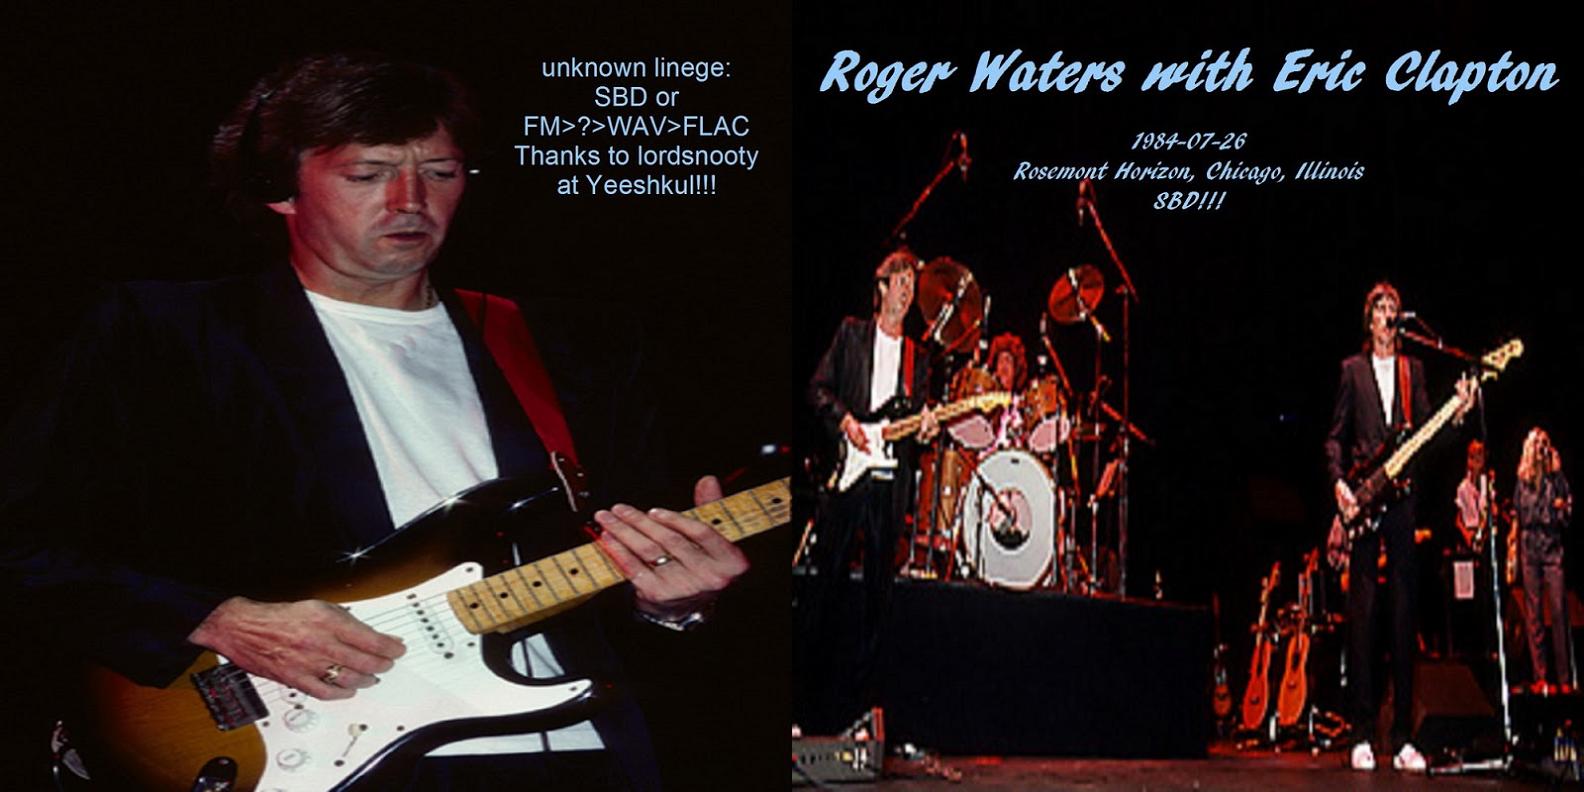 1984-07-26-ROGER_WATERS_WITH_ERIC_CLAPTON-front